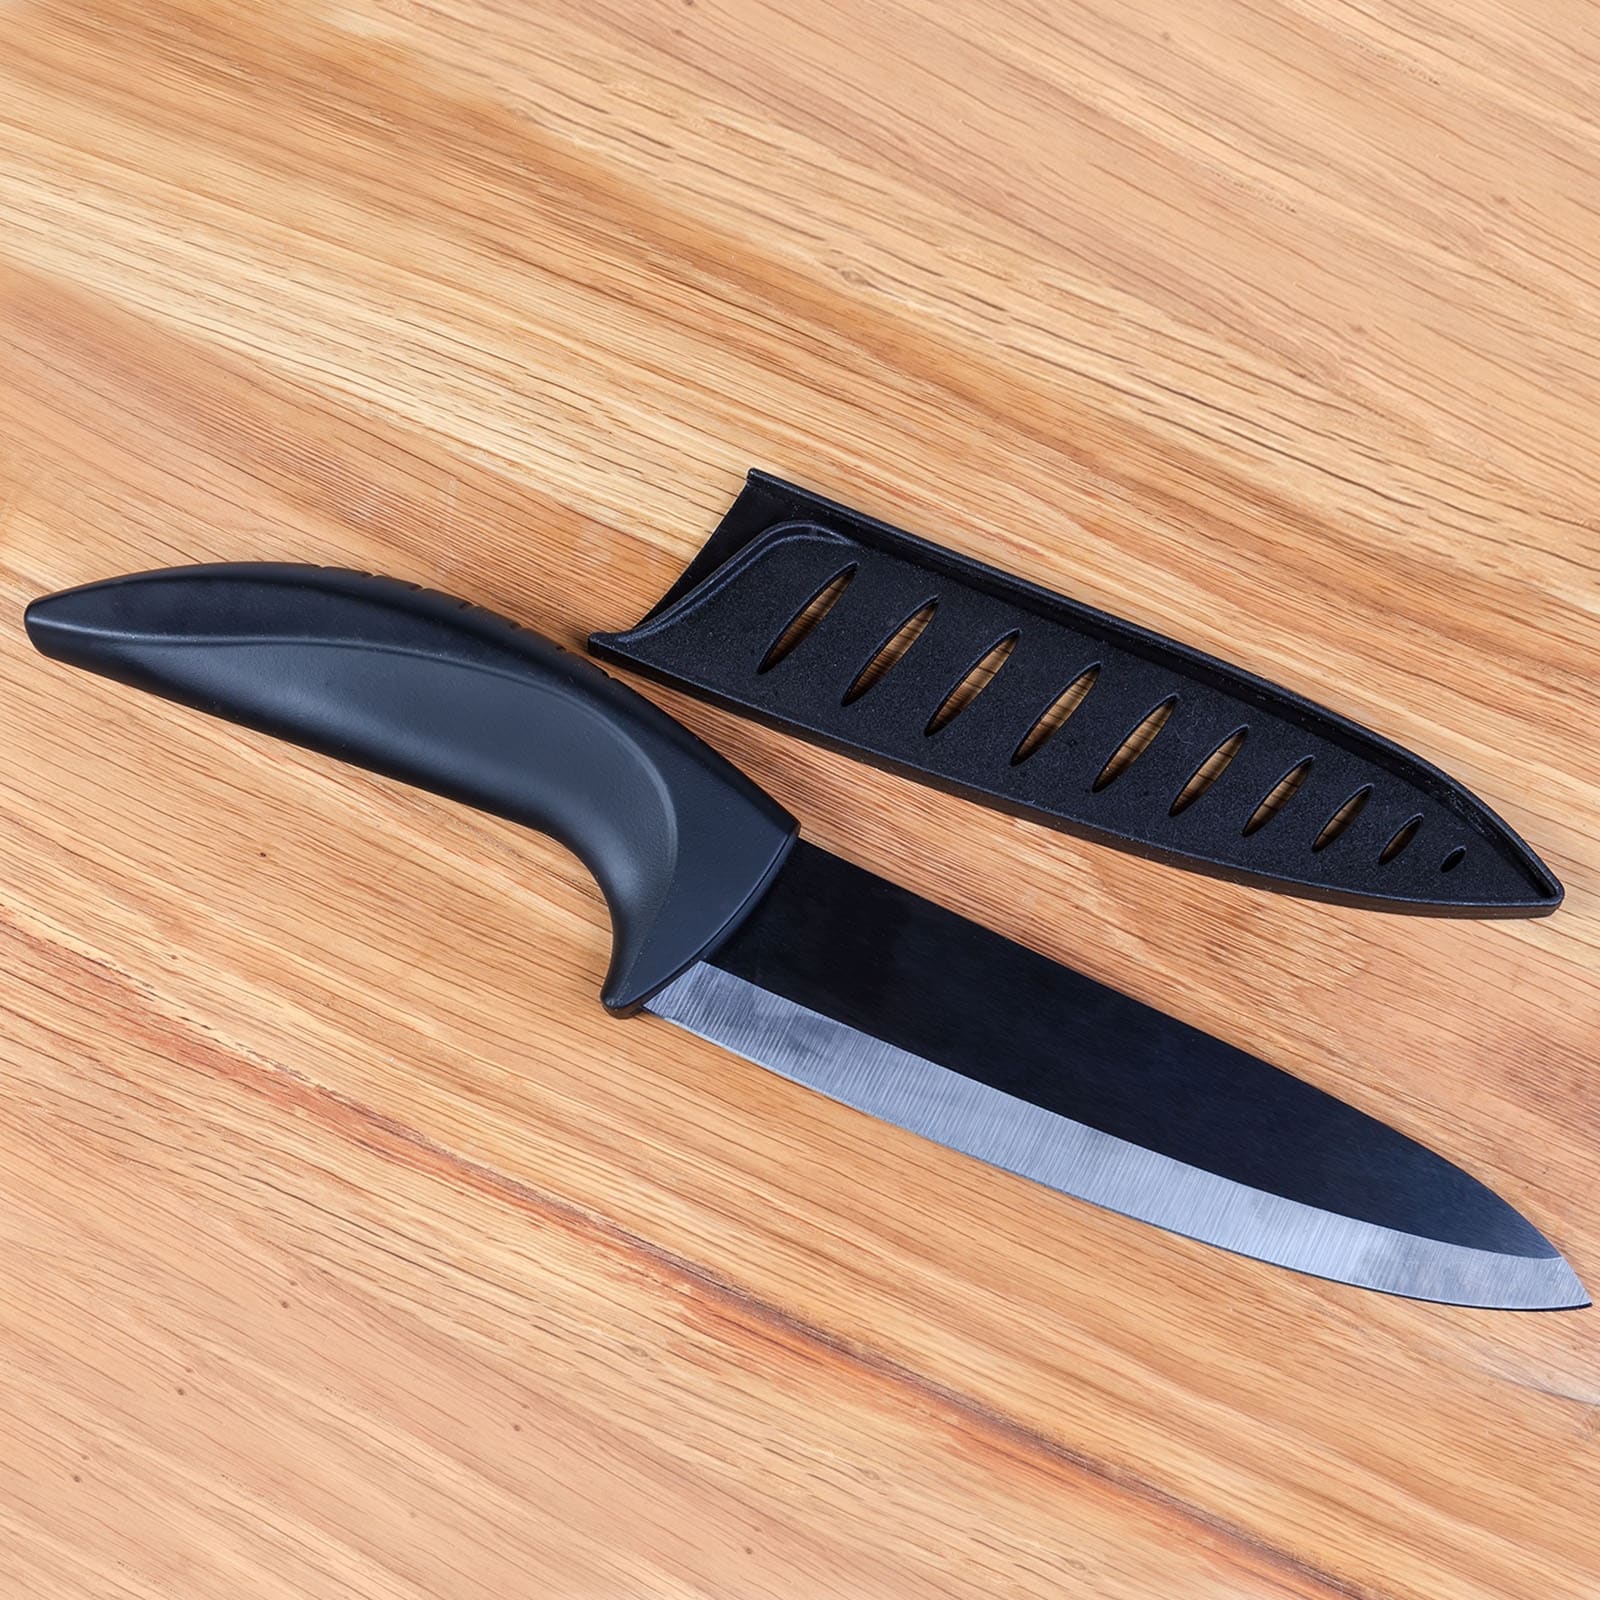 https://ak1.ostkcdn.com/images/products/is/images/direct/dfcd1d3abb09f54b06f6b4c9420c5139c638a17c/Plastic-Kitchen-Knife-Sheath-Cover-Sleeves-for-8%22-Chef-Knife%2C-Black.jpg